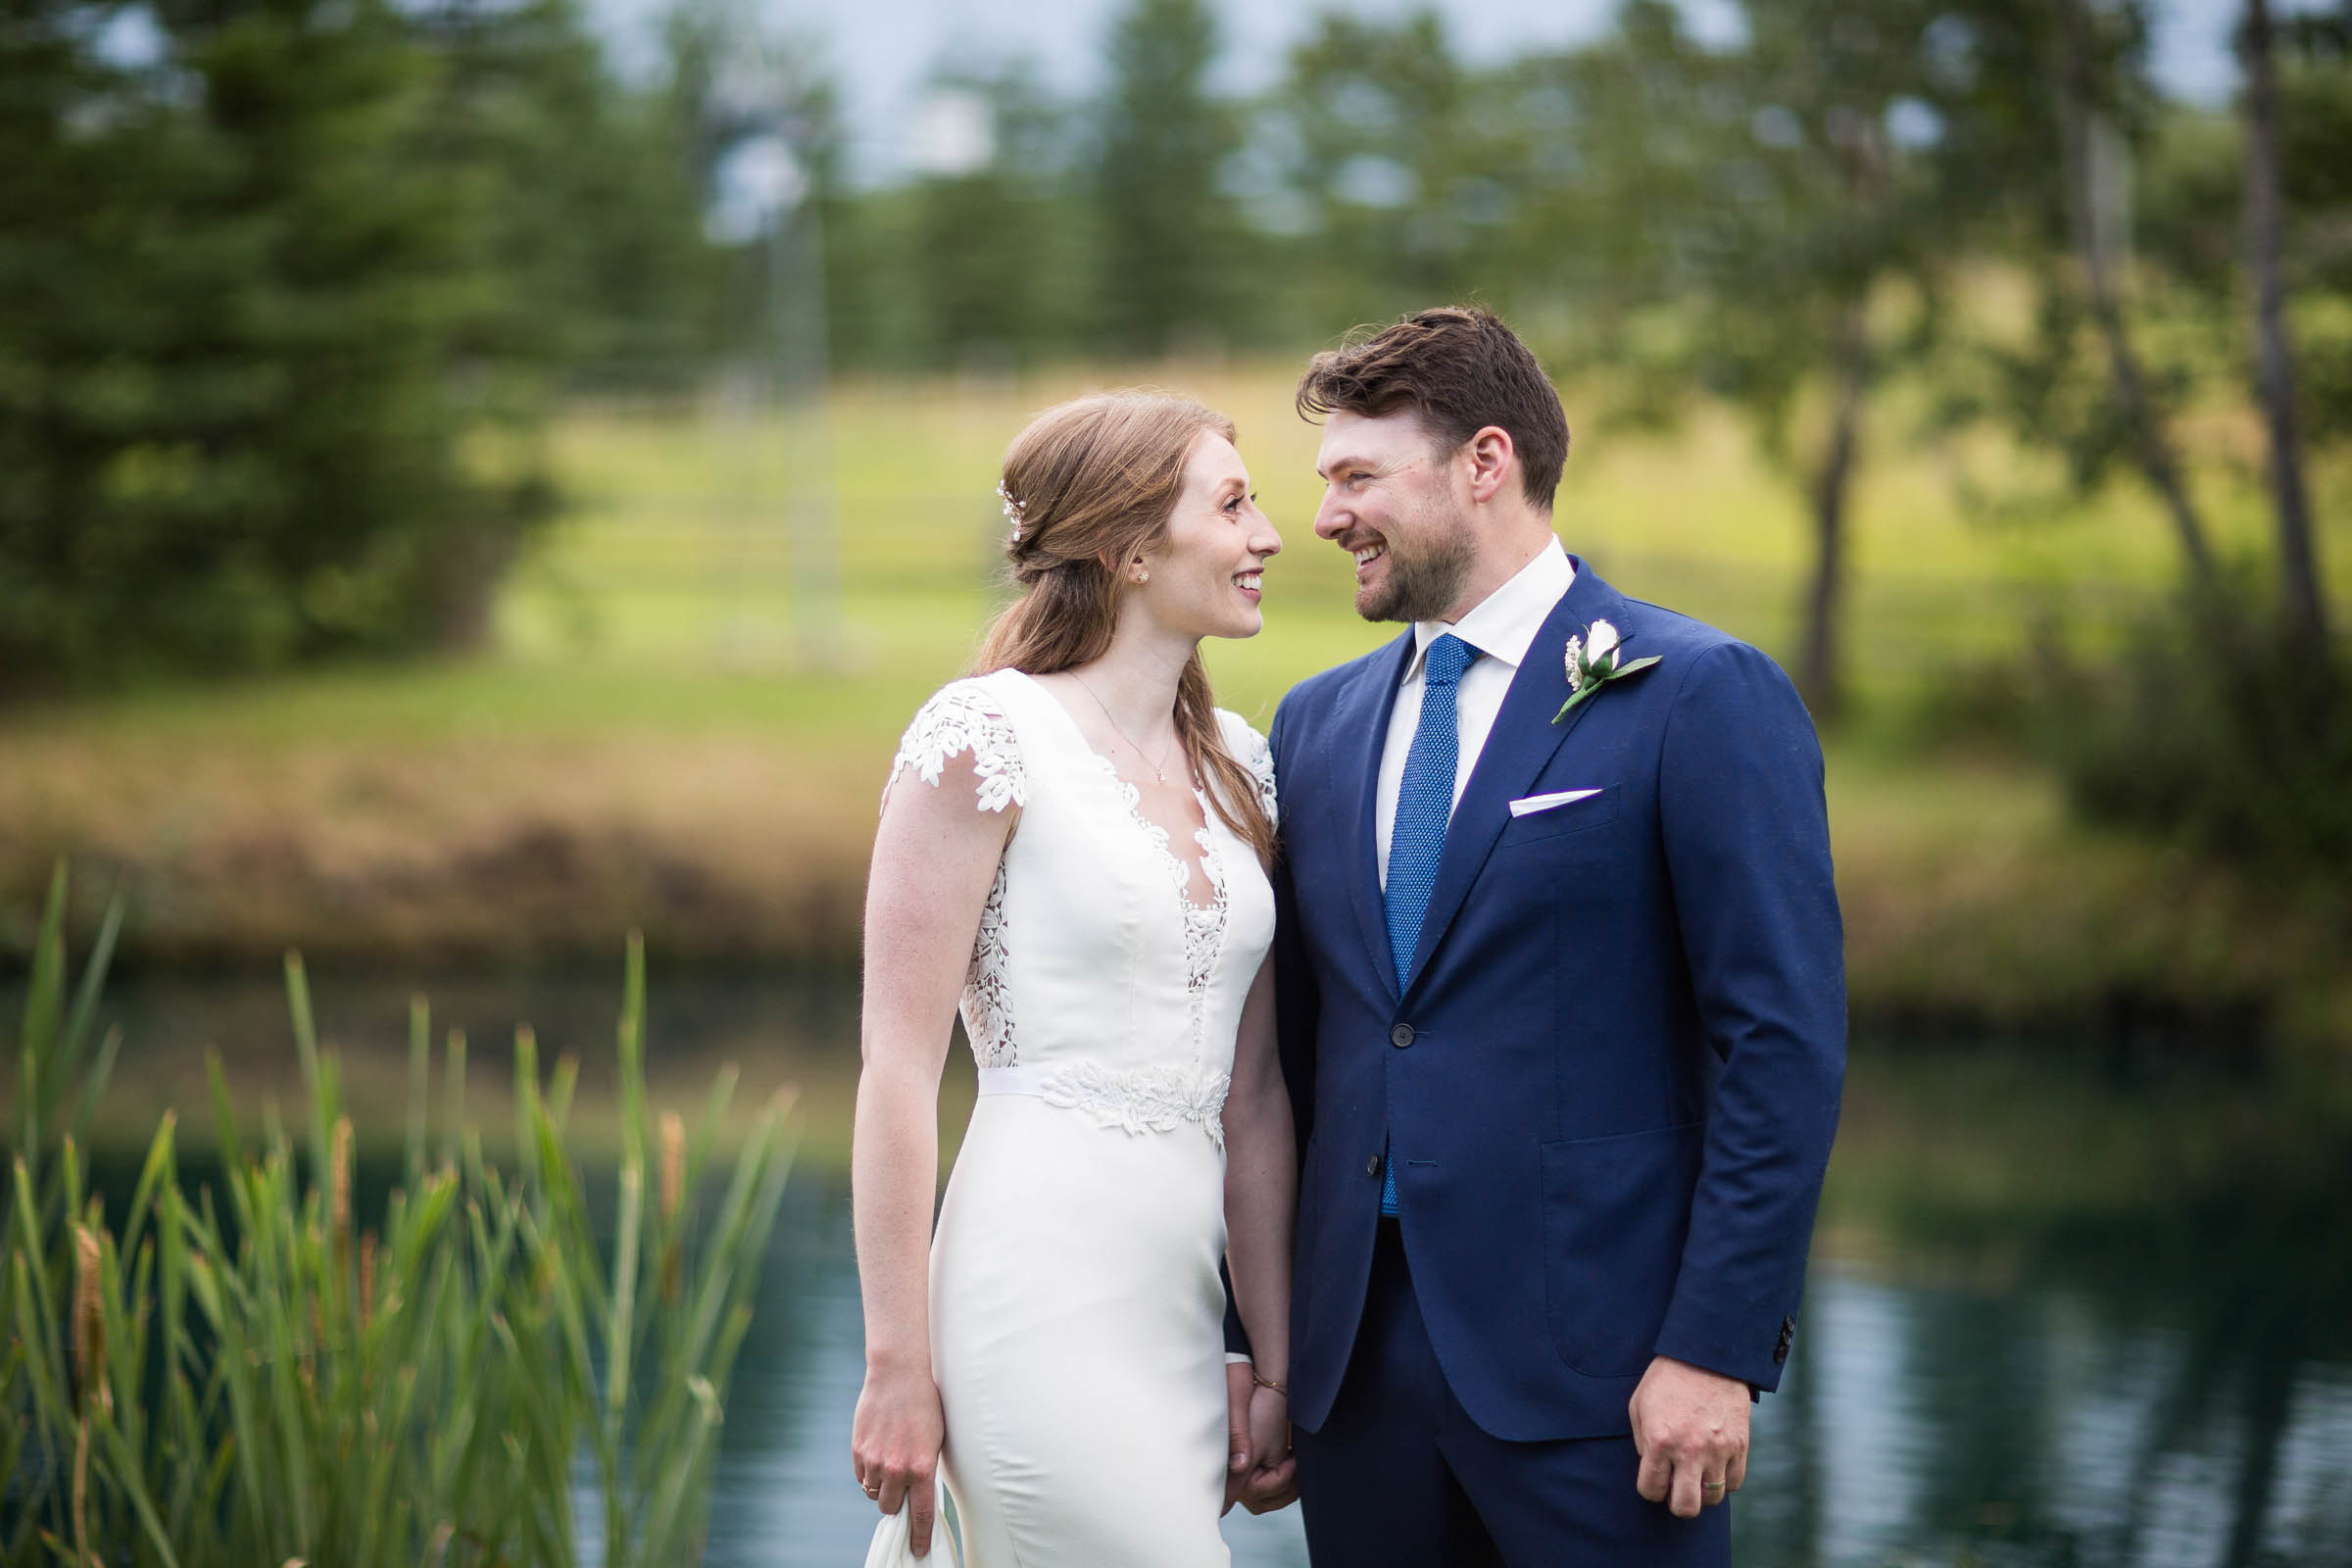 Bride and groom looking into each others eyes in front of small lake and greenery